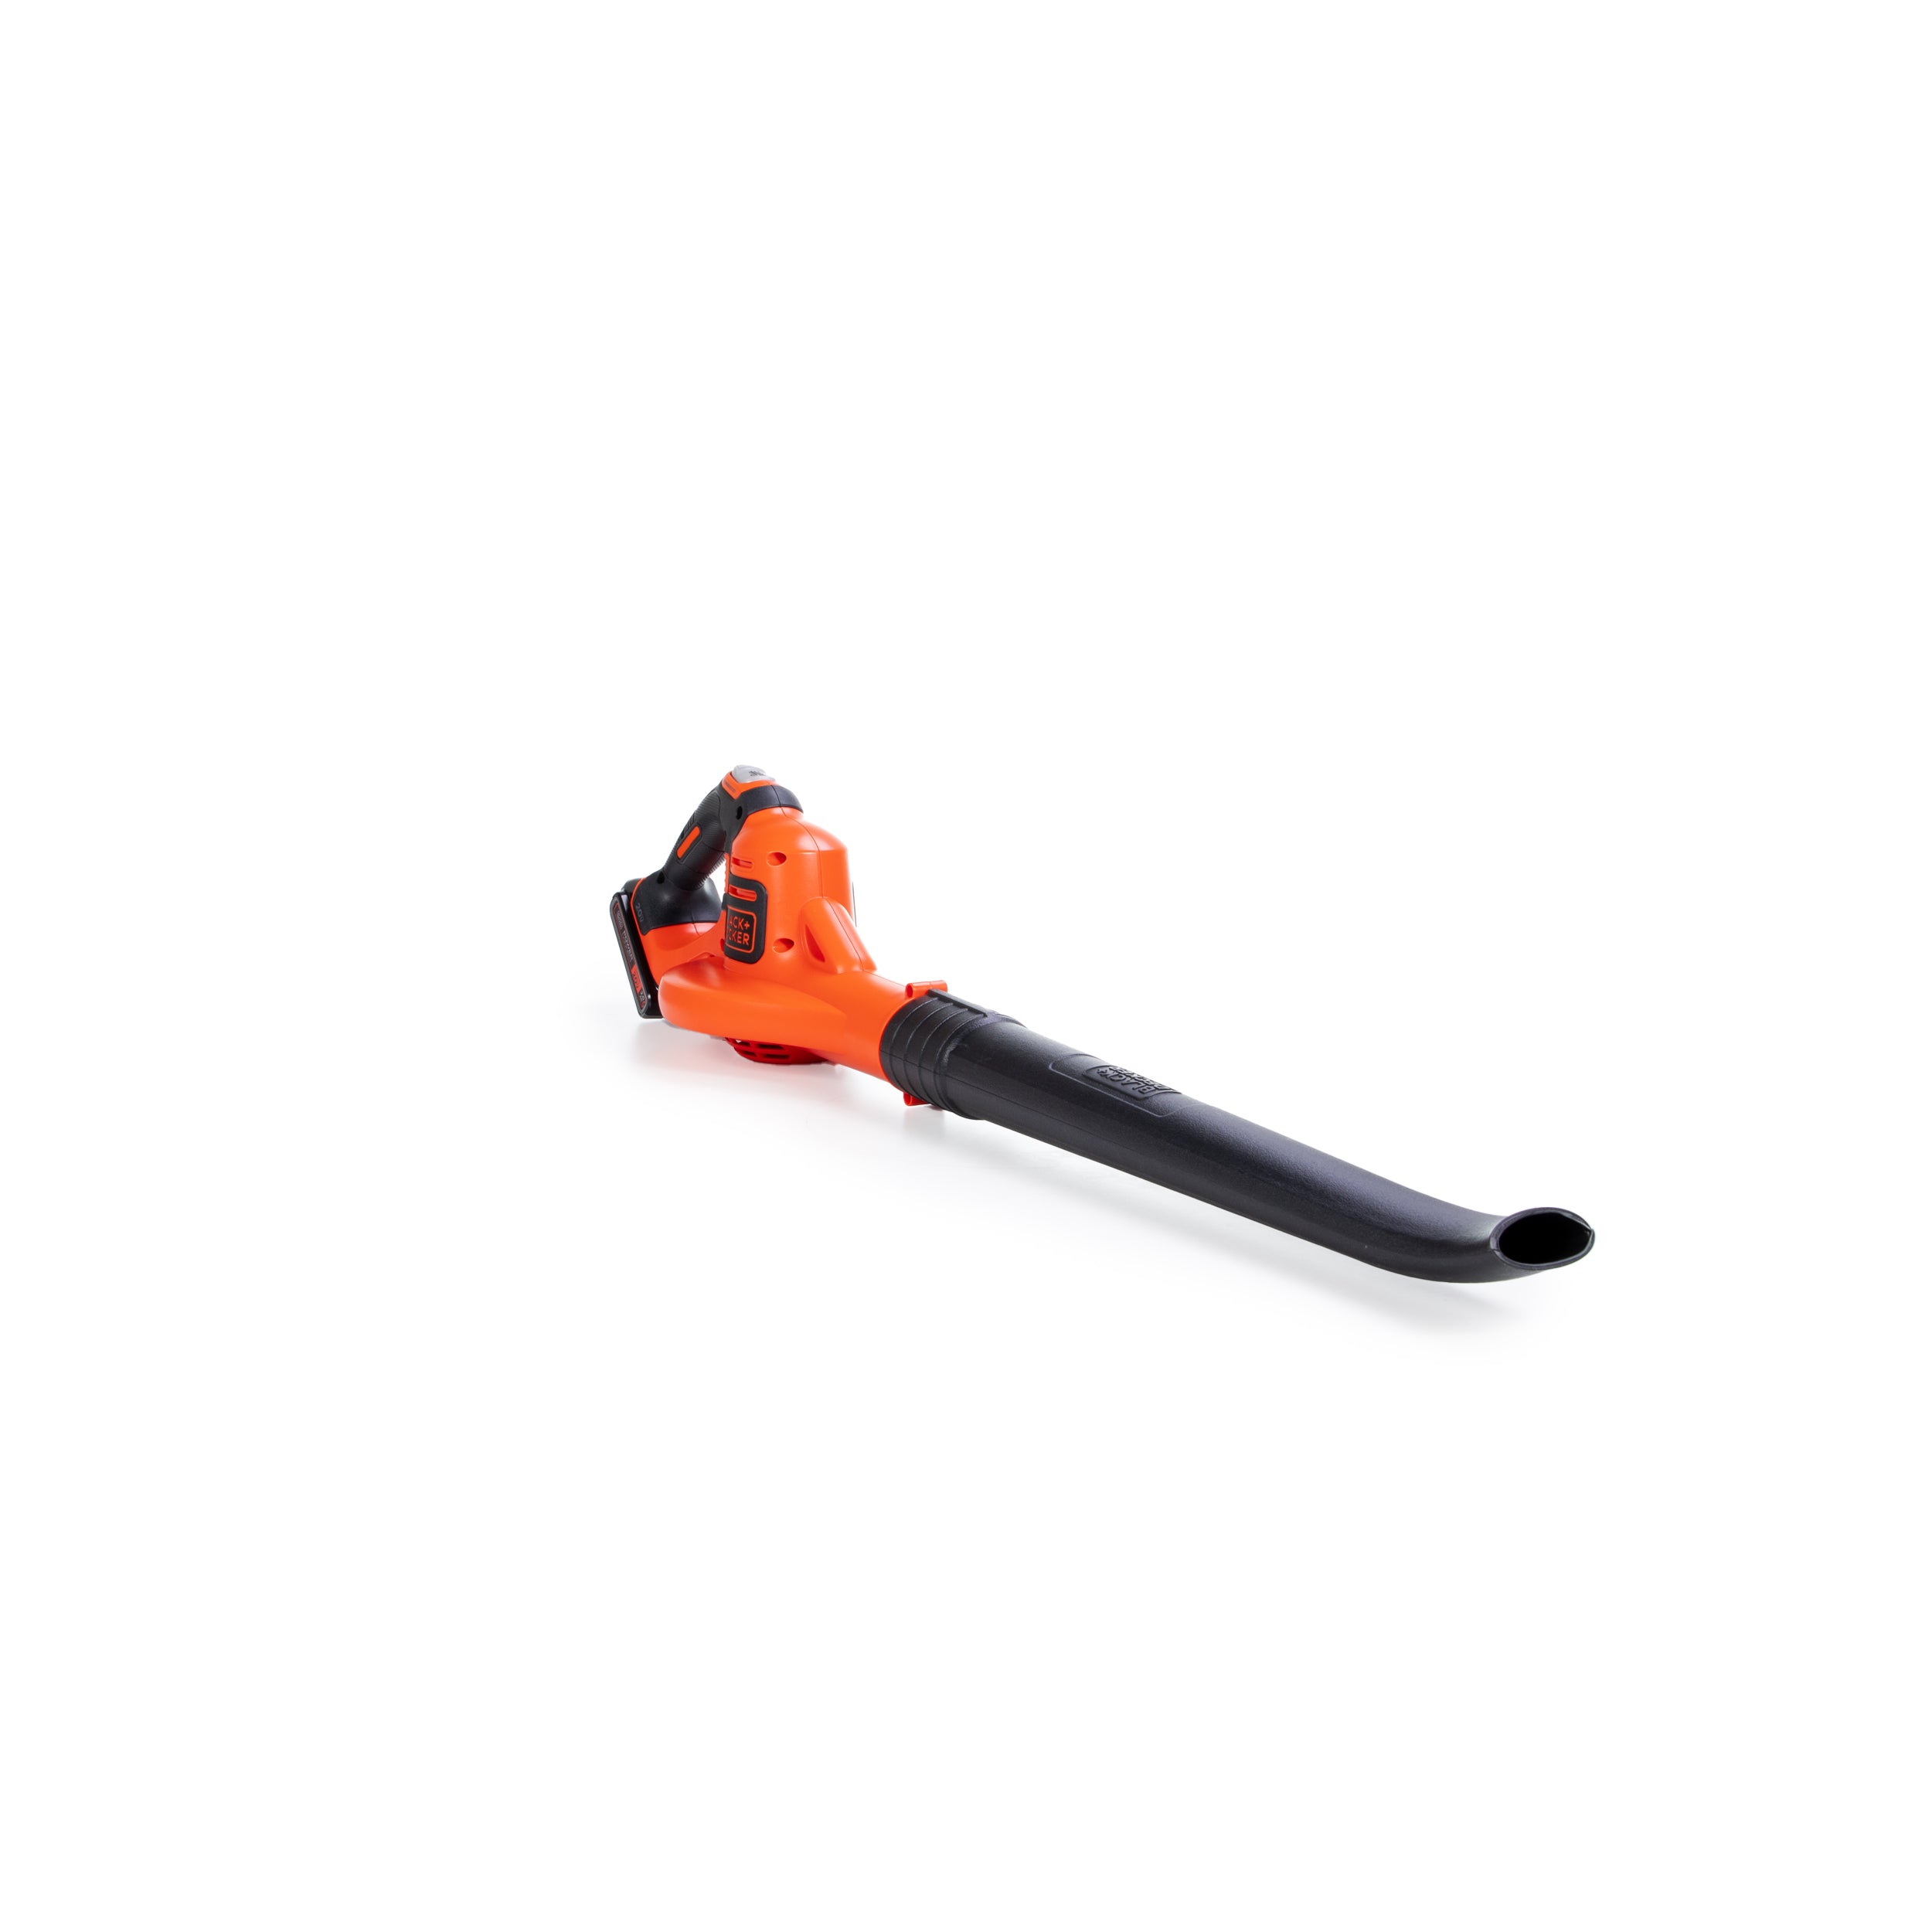 BLACK+DECKER 20V MAX Cordless Sweeper with Power Boost just $49.99